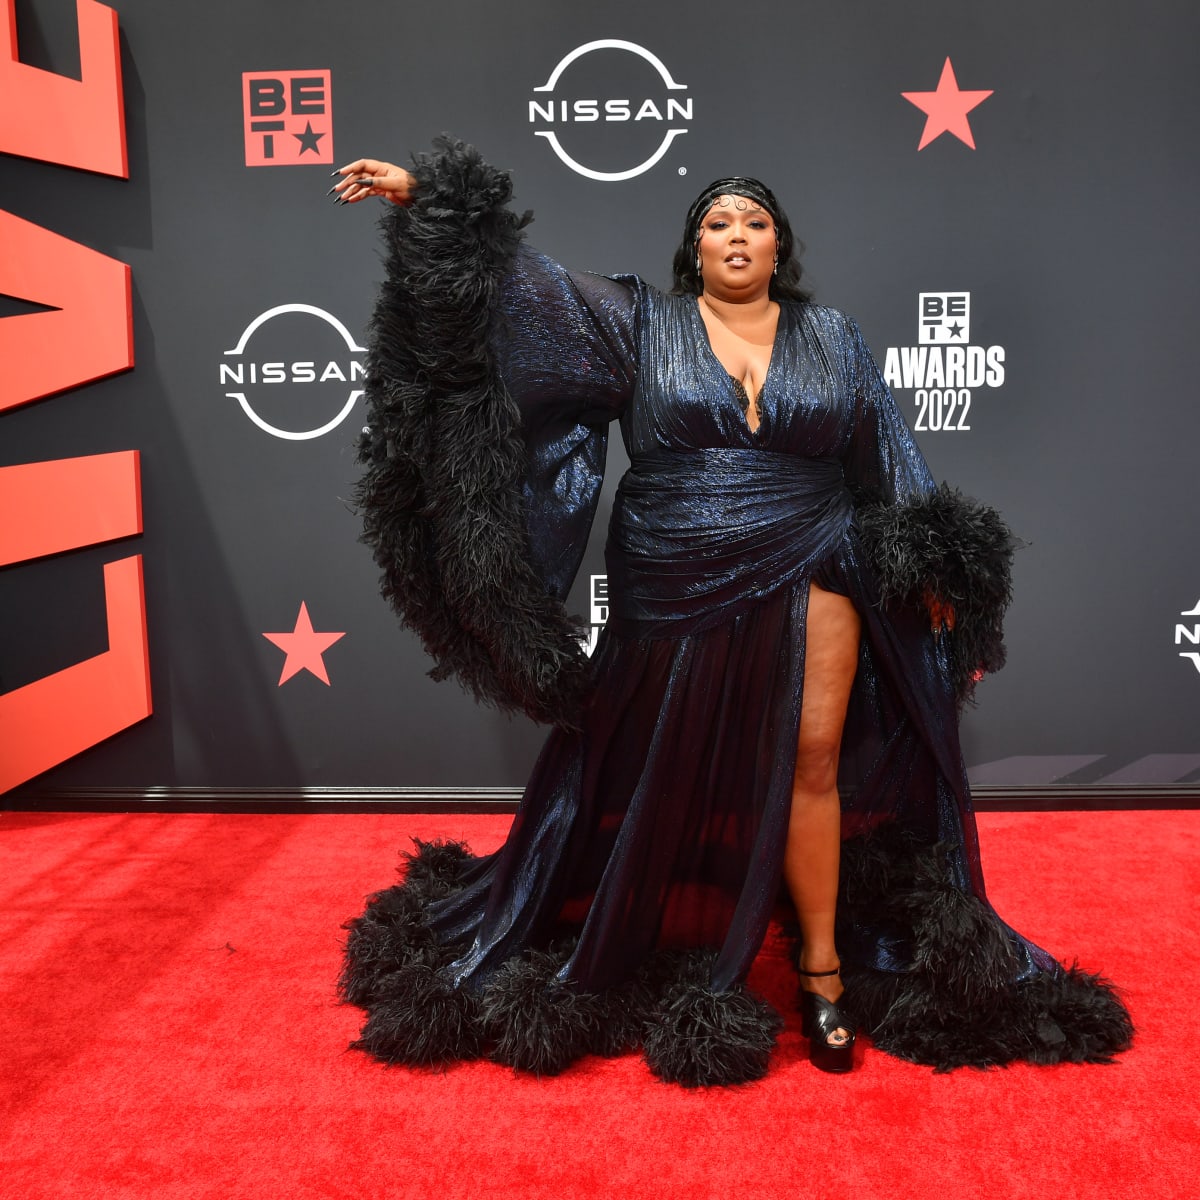 The 23 Best Looks From the 2022 BET Awards - Fashionista